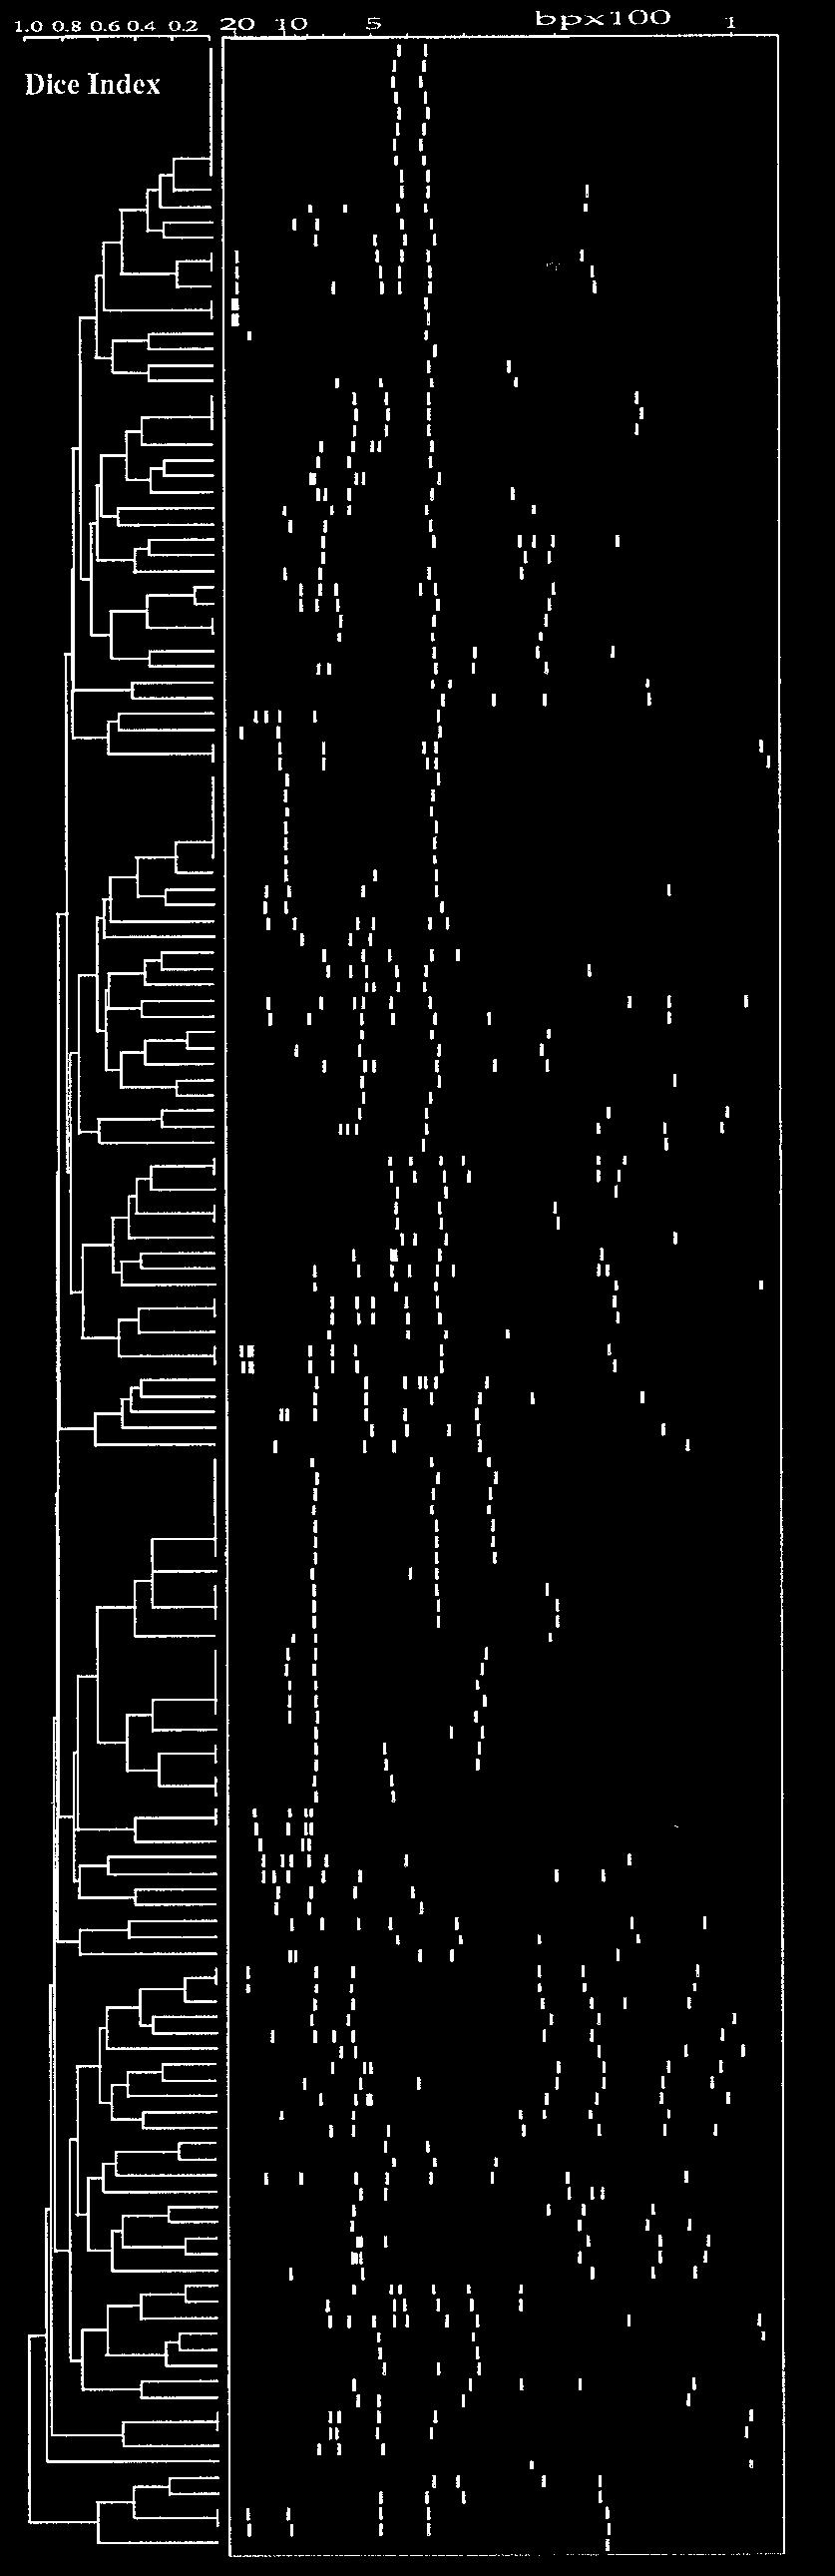 VOL. 37, 1999 COMPARATIVE EVALUATION OF LMPCR AND SPOLIGOTYPING 3121 FIG. 2. Dendrogram and associated schematic representation of LMPCR patterns of the 158 M.